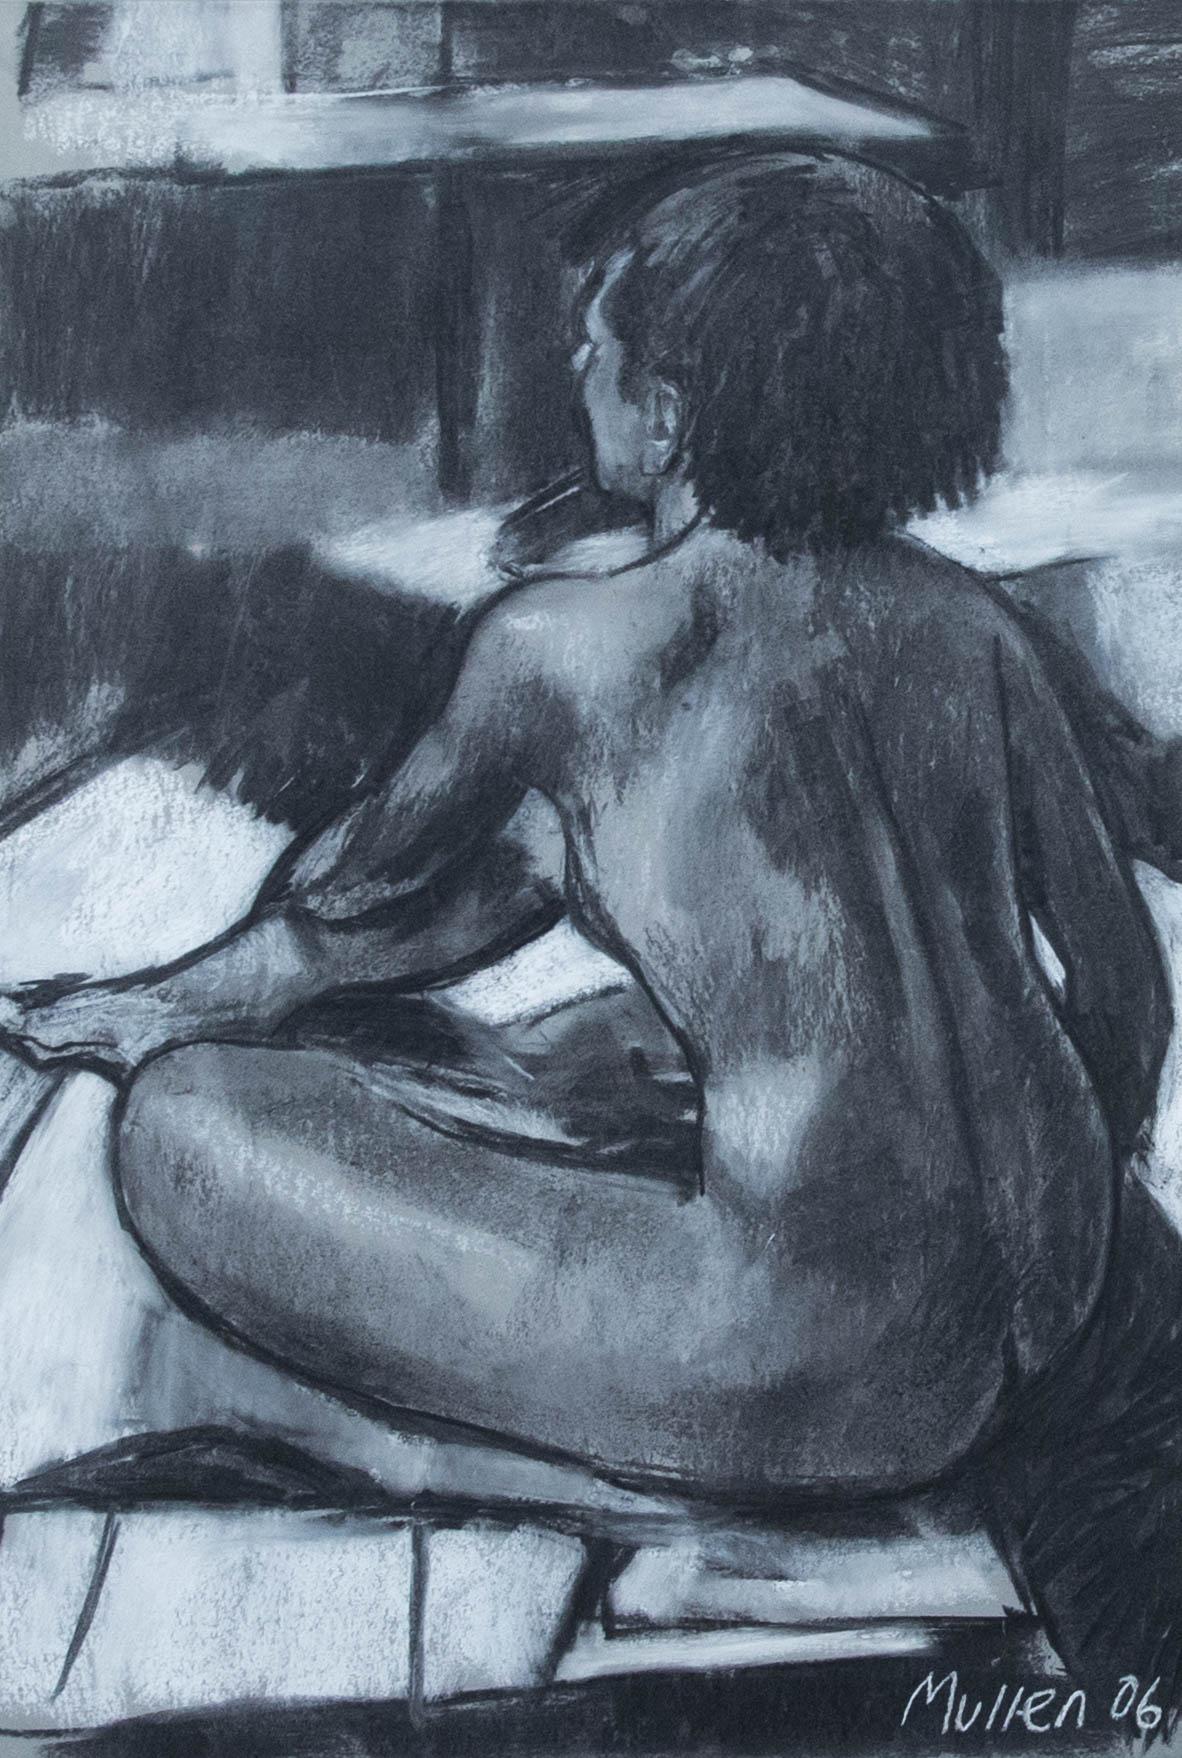 Tonal work in charcoal and chalk. Signed to the lower right and dated '06. Presented in a large contemporary frame with a crisp white mount. On paper.
